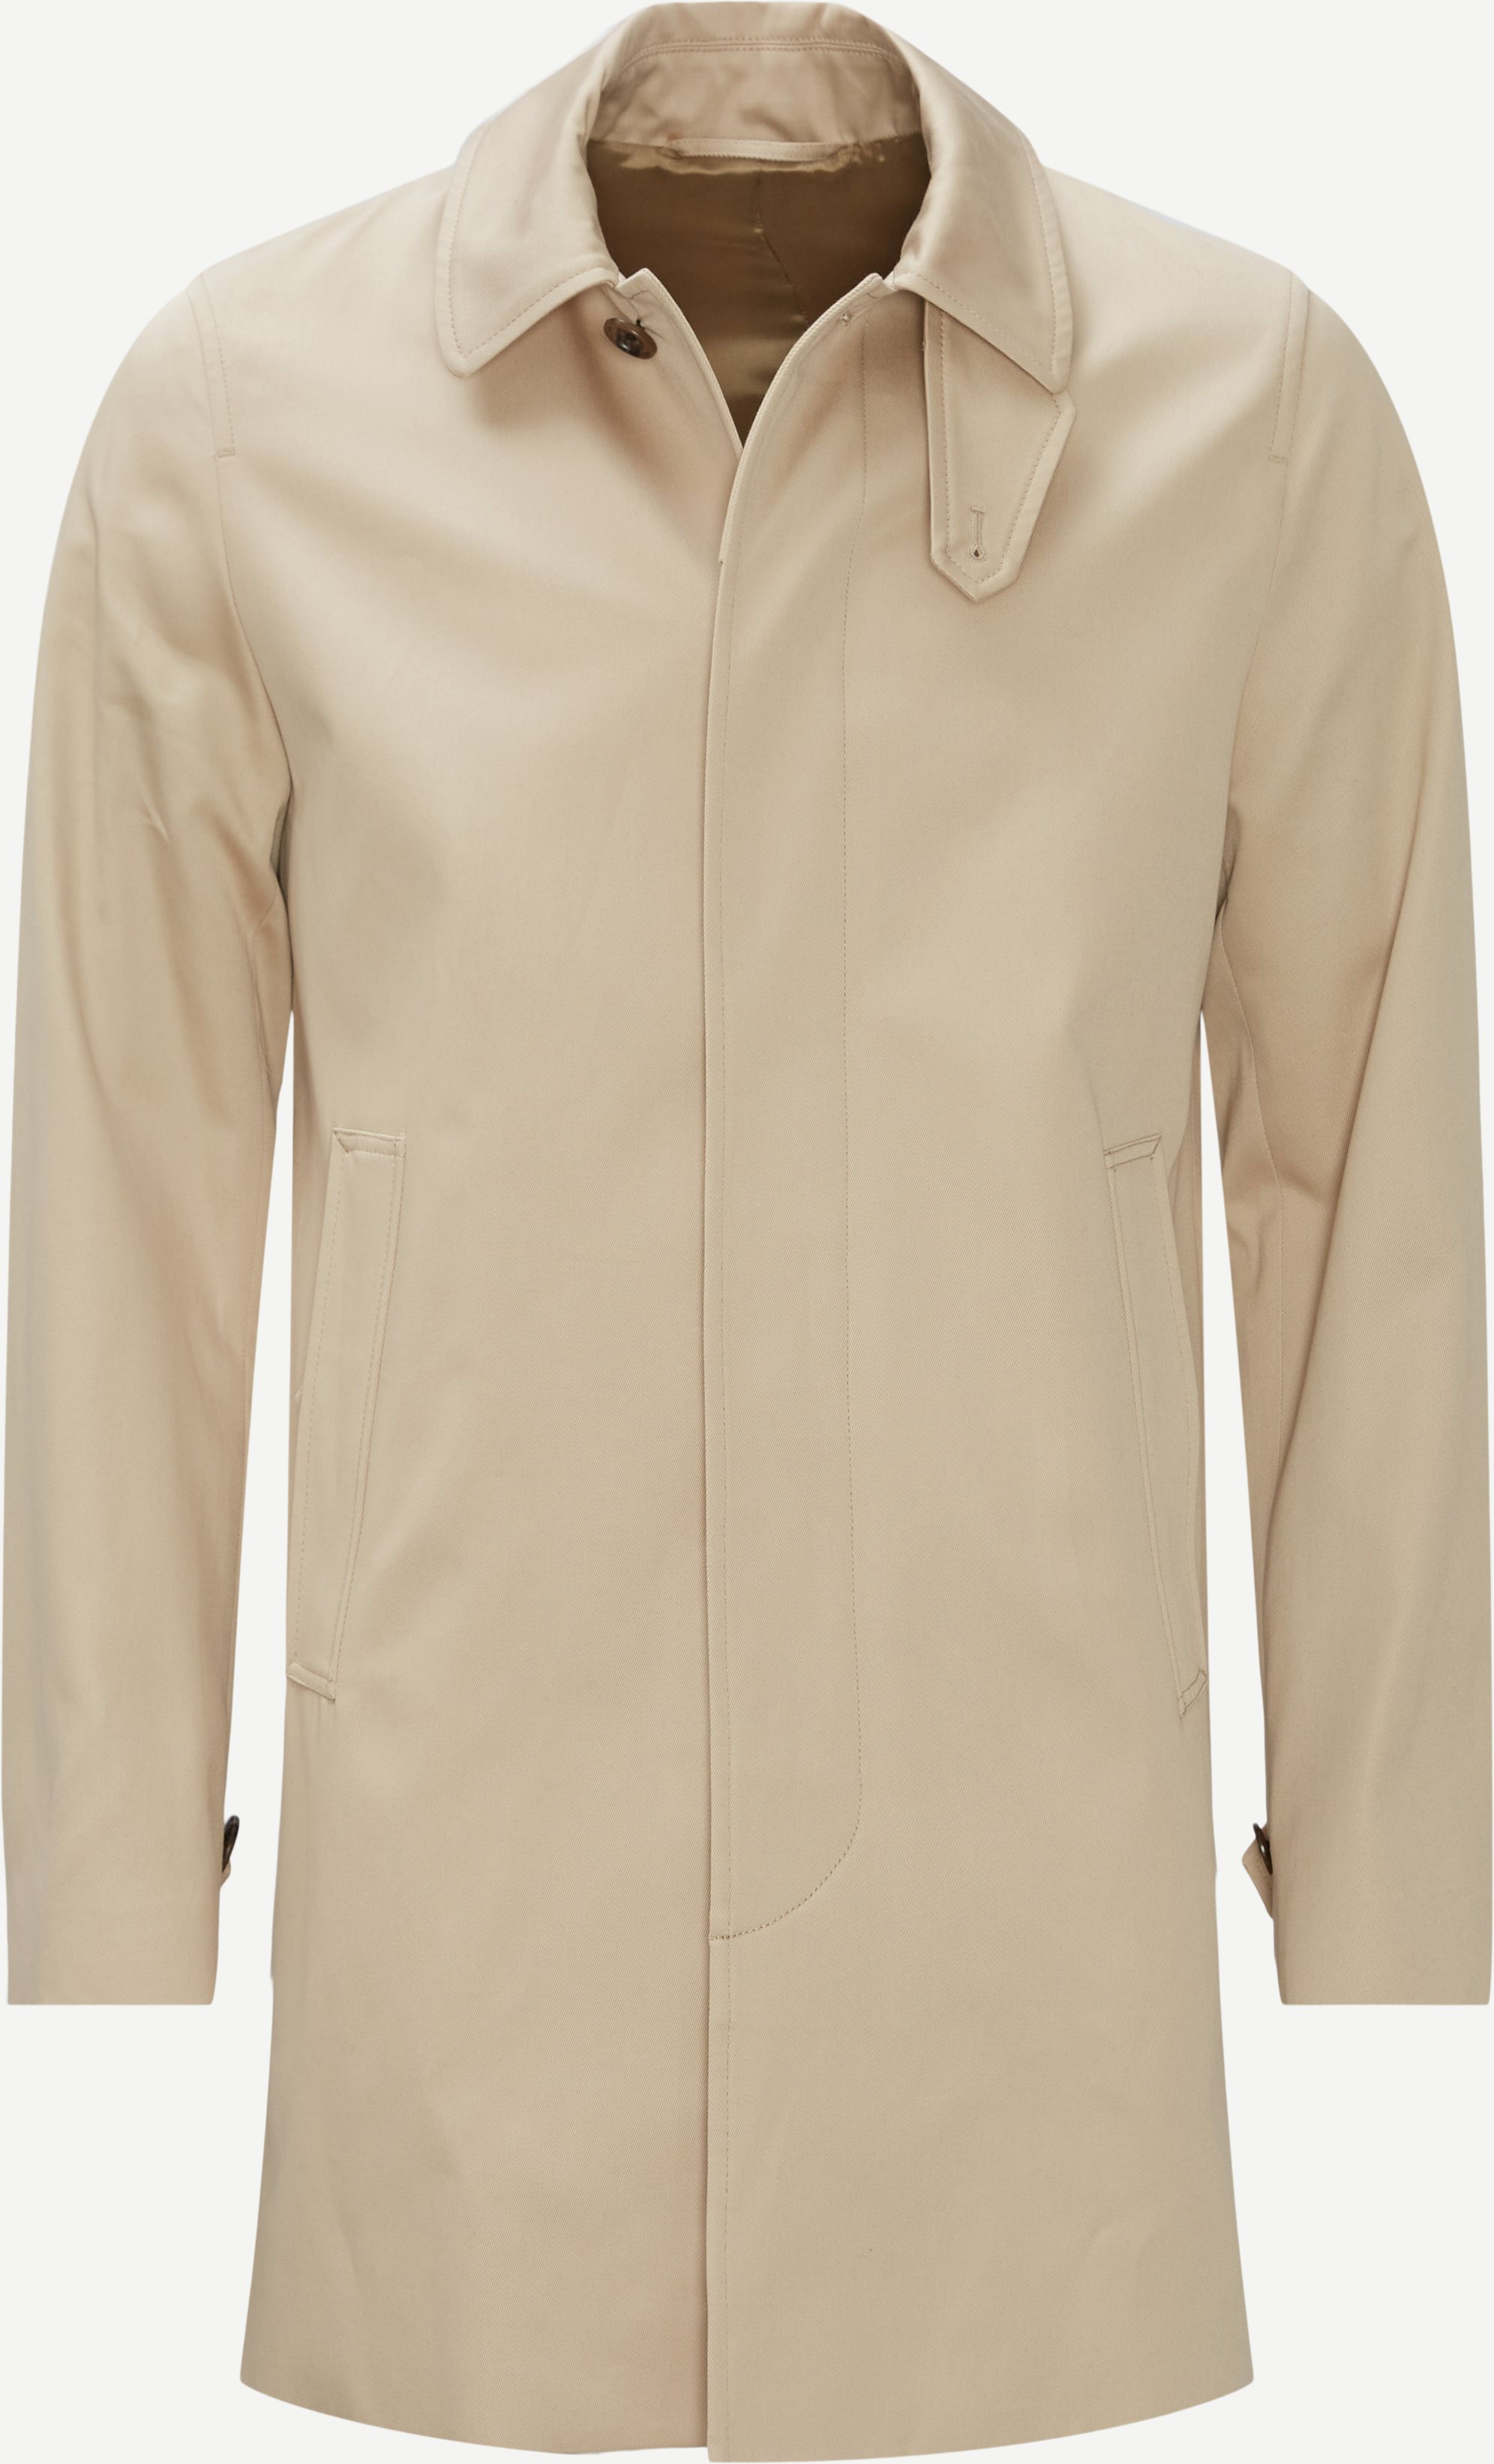 Tiger of Sweden Jackets 69307 CARSOON Sand